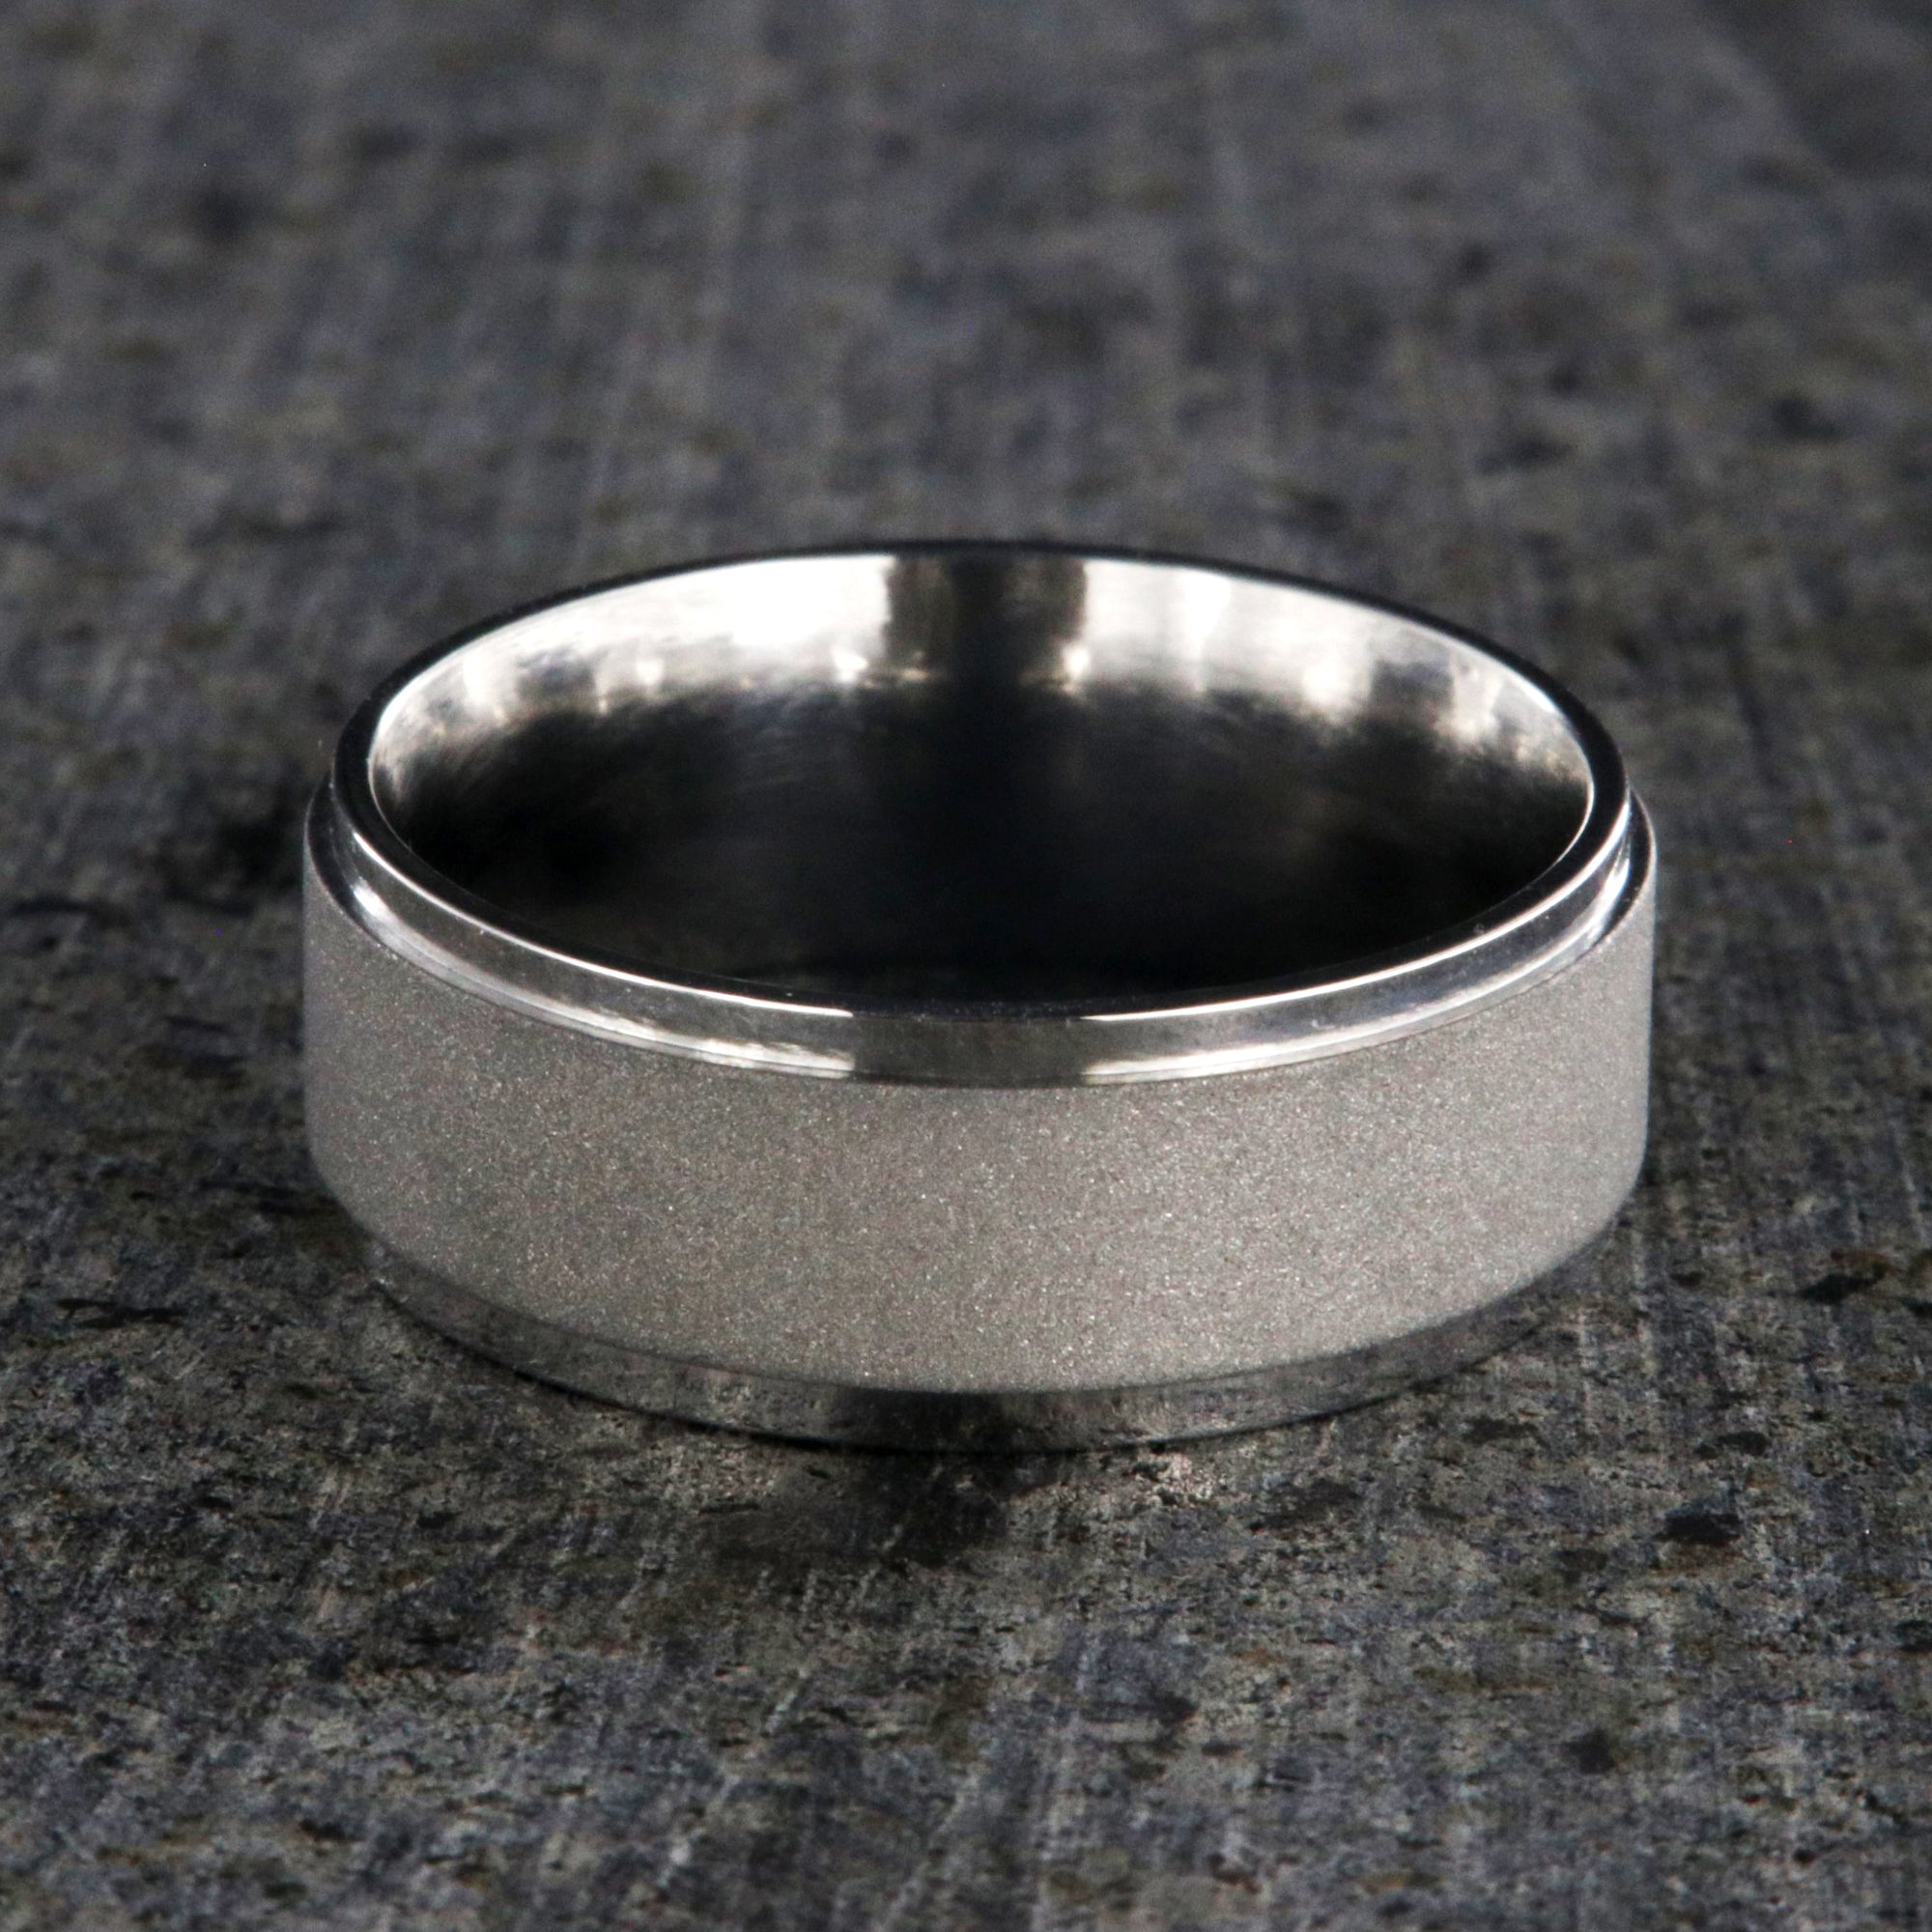 8mm wide cobalt wedding band with a raised-center and sandblasted finish